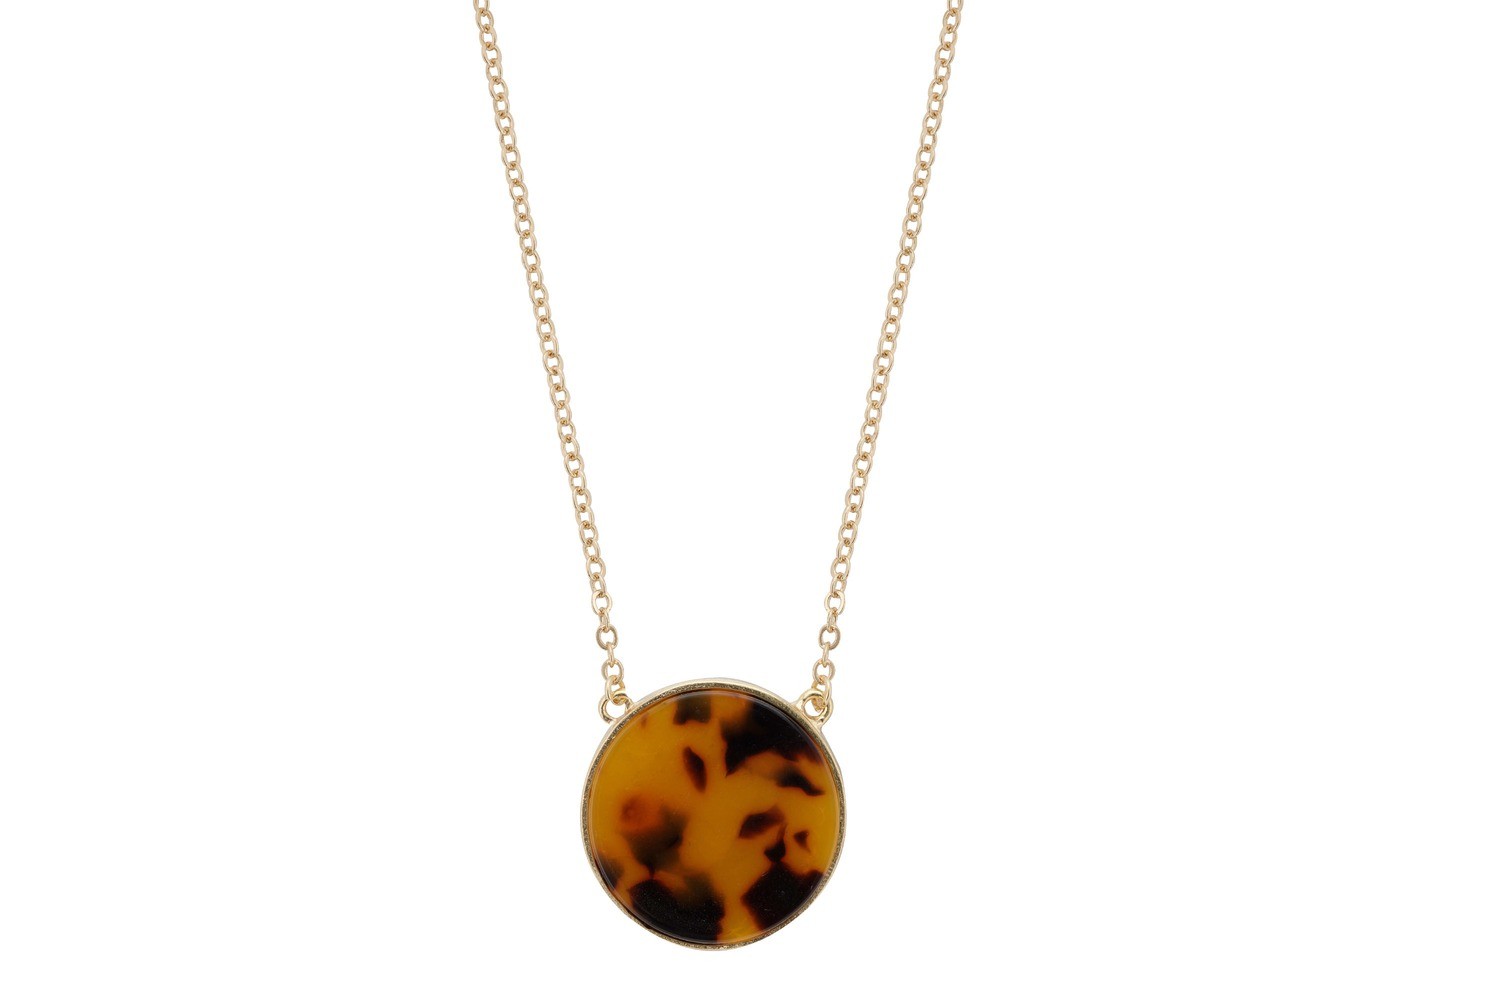 Tortoiseshell Necklace with Gold Finish Chain